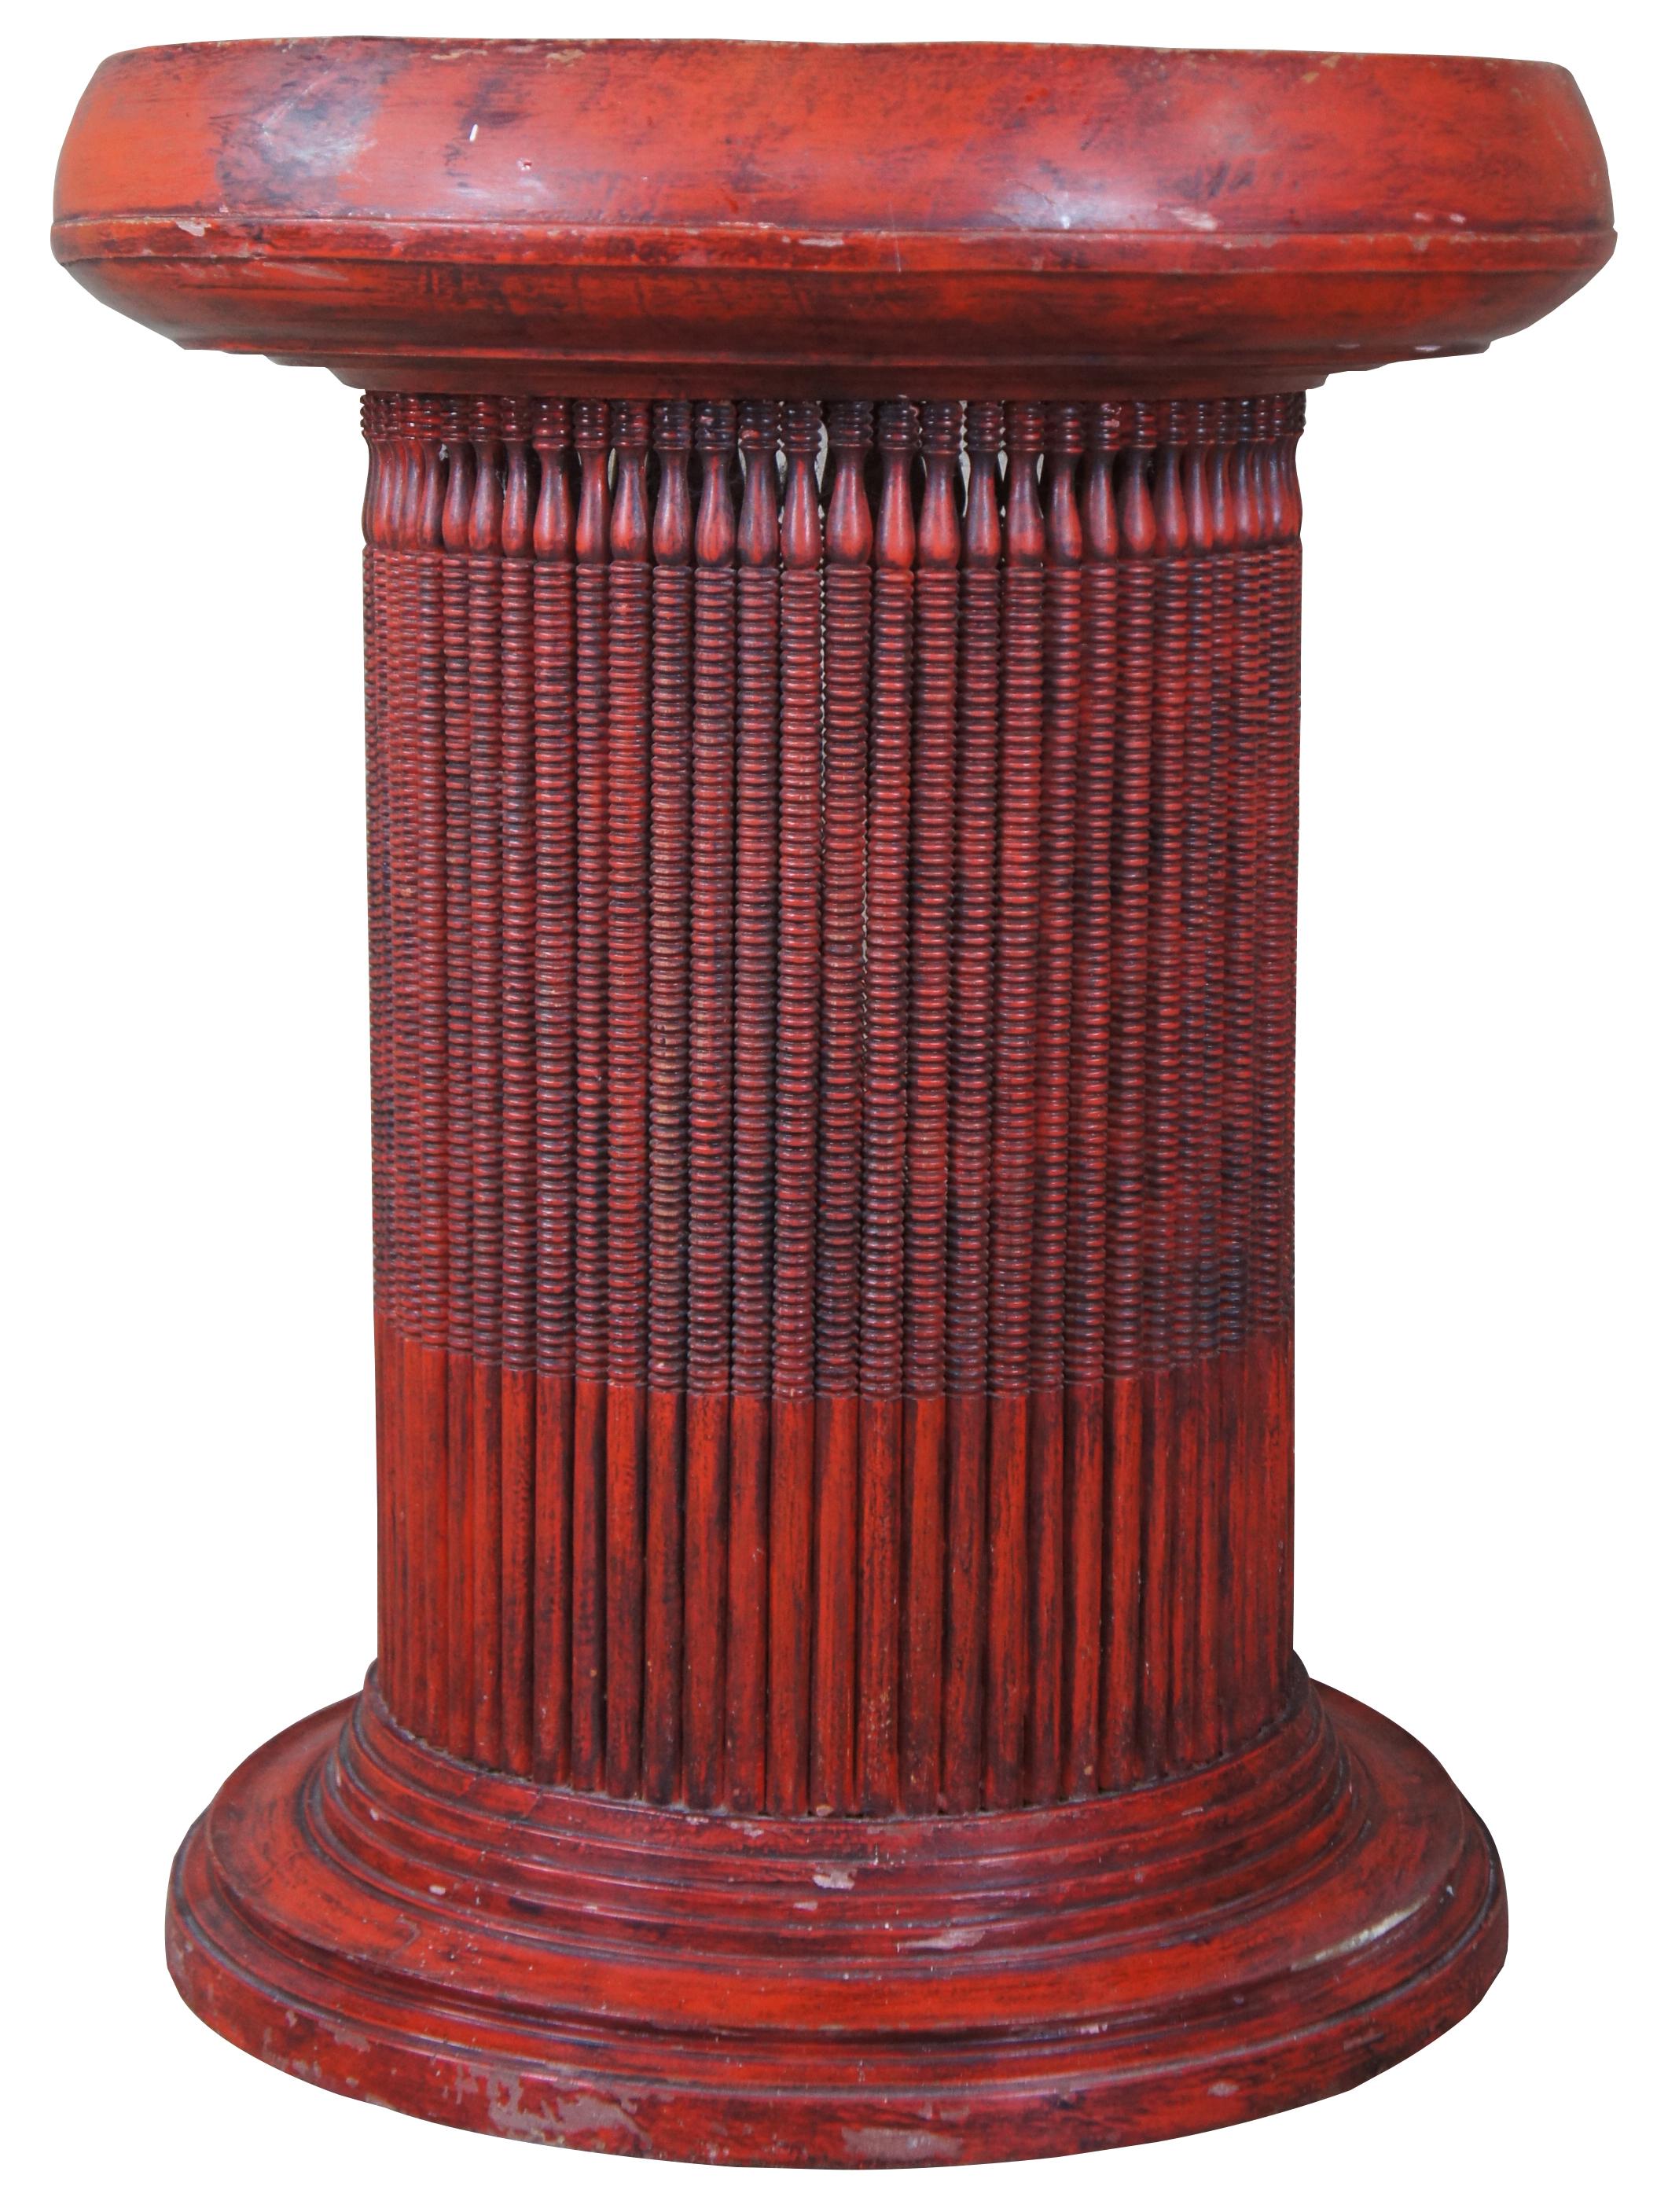 A very unique Primitive red painted Folk Art bowl or tray top table or base. Features a round bowl shaped top compartment supported by turned ribbed columns arranged in a fluted circle over a pedestal base.